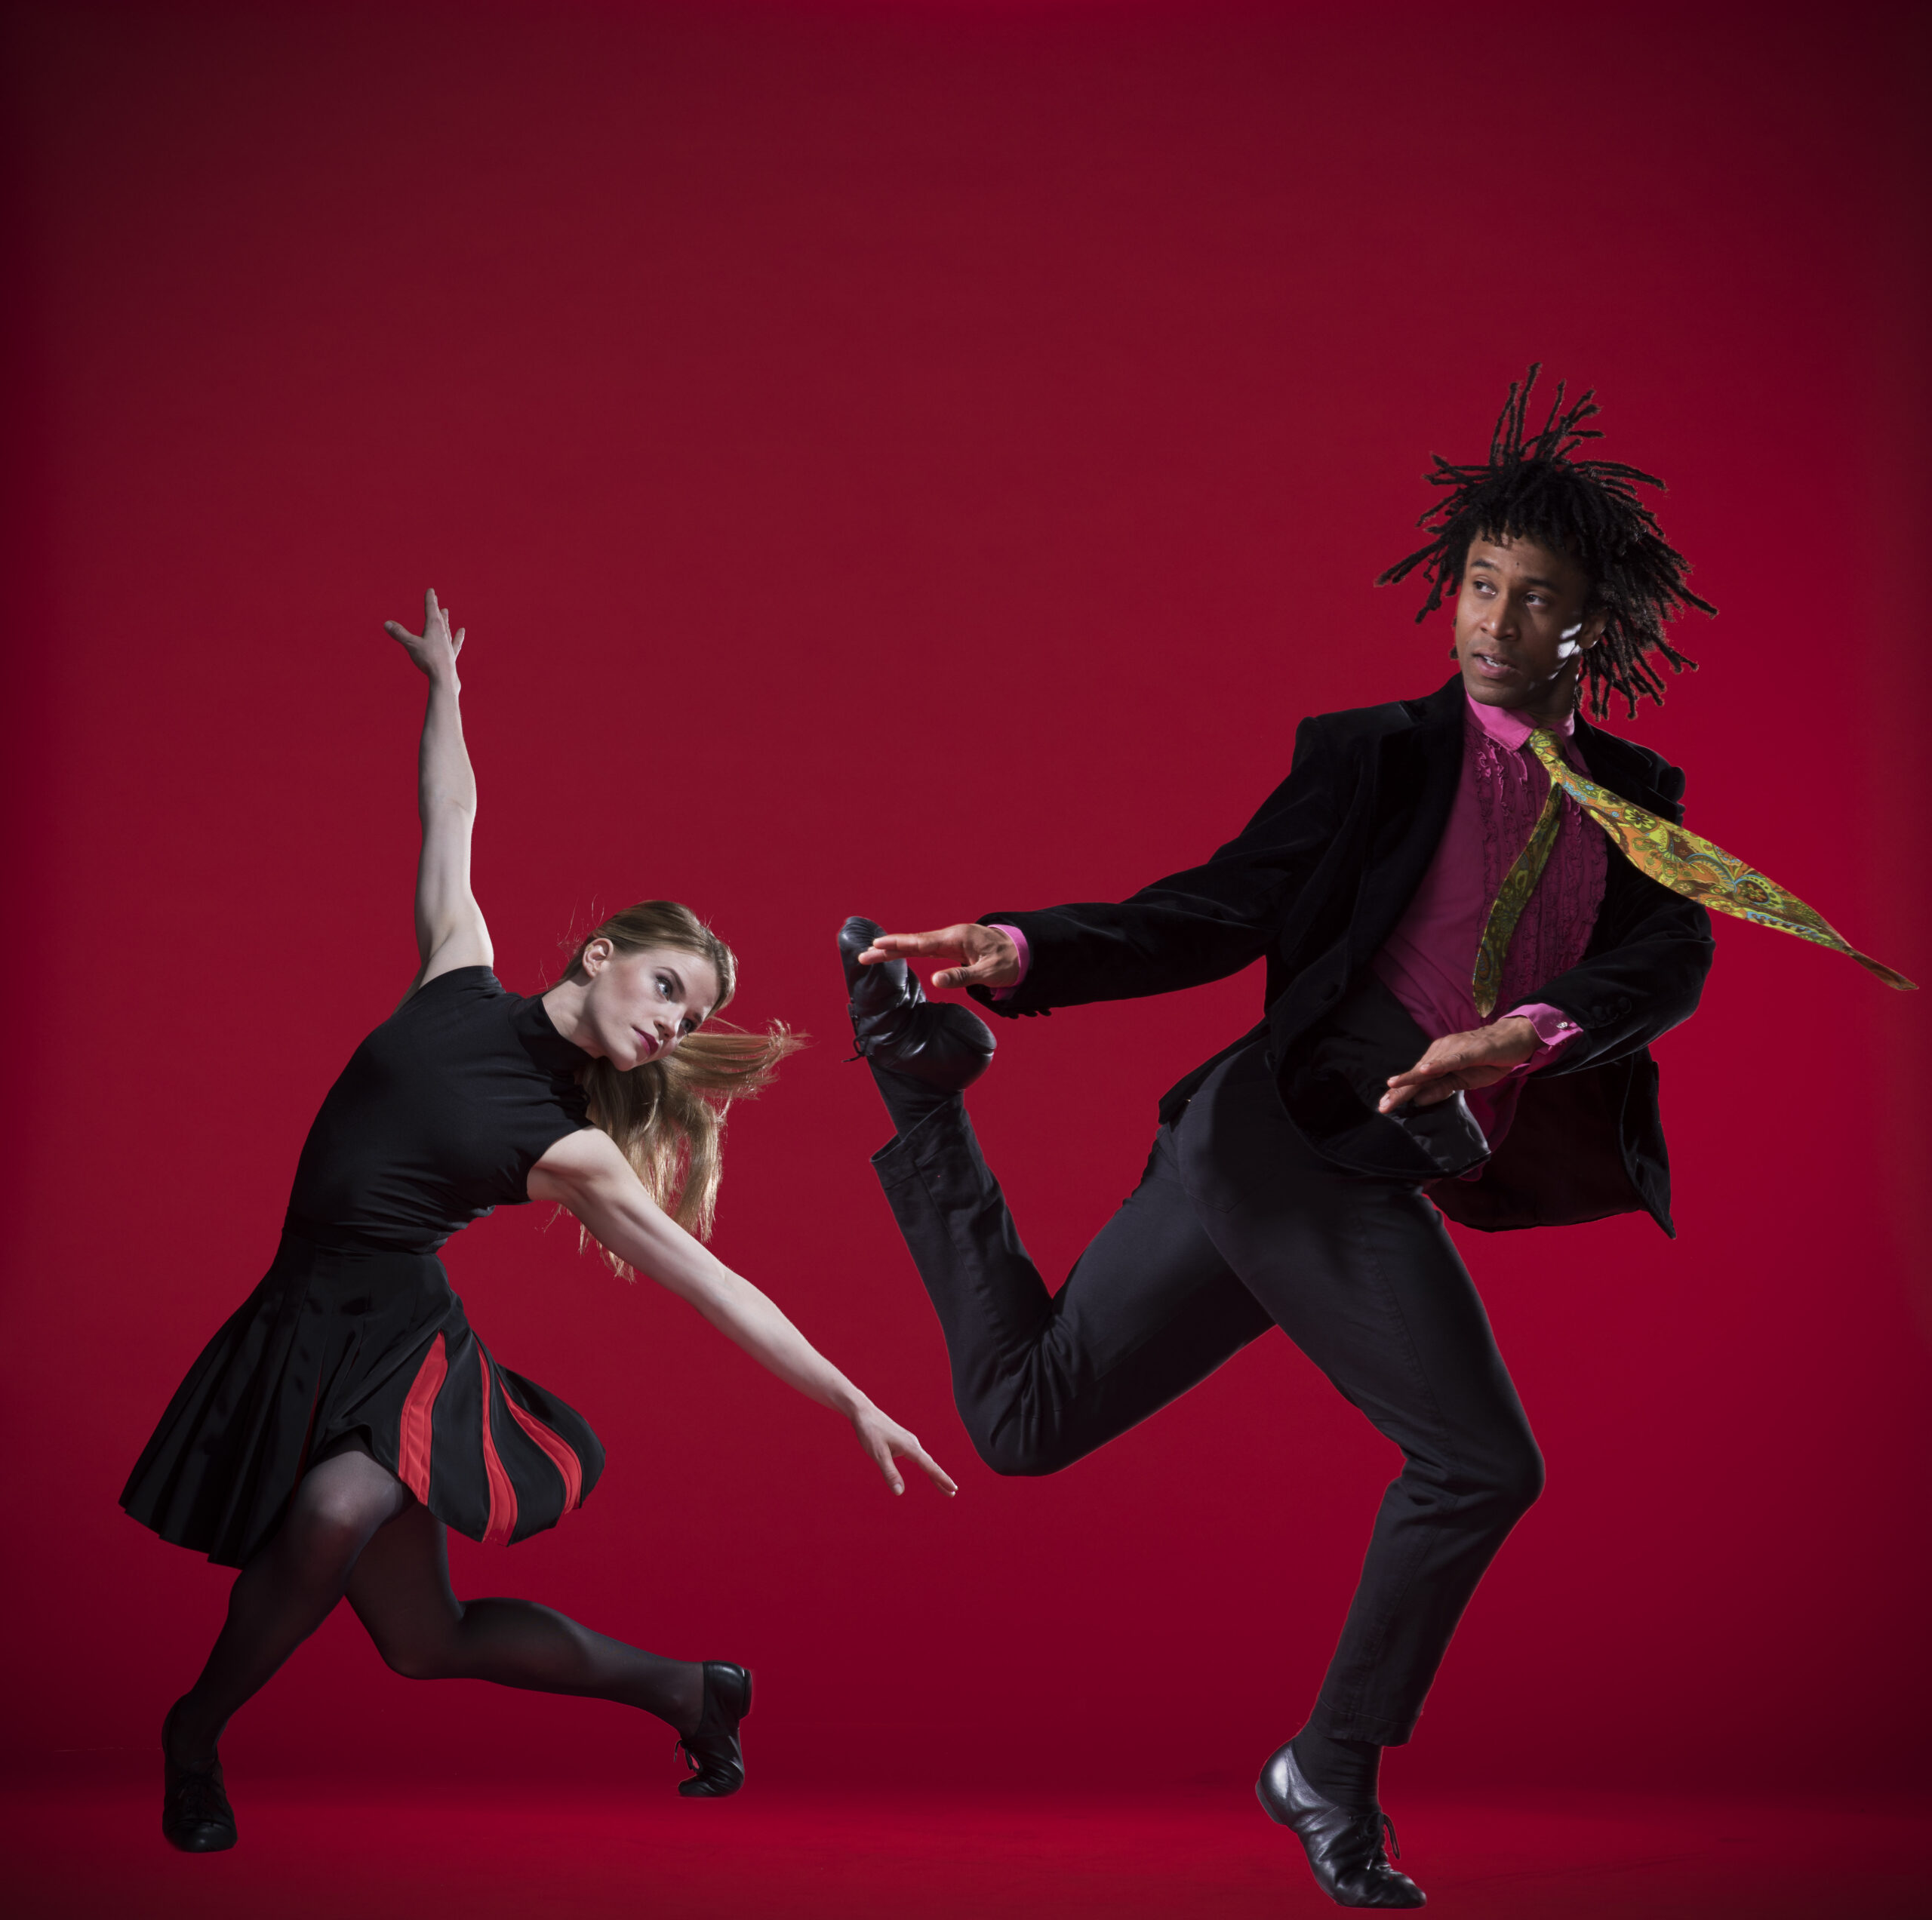 A man and a woman dancing on a red background.